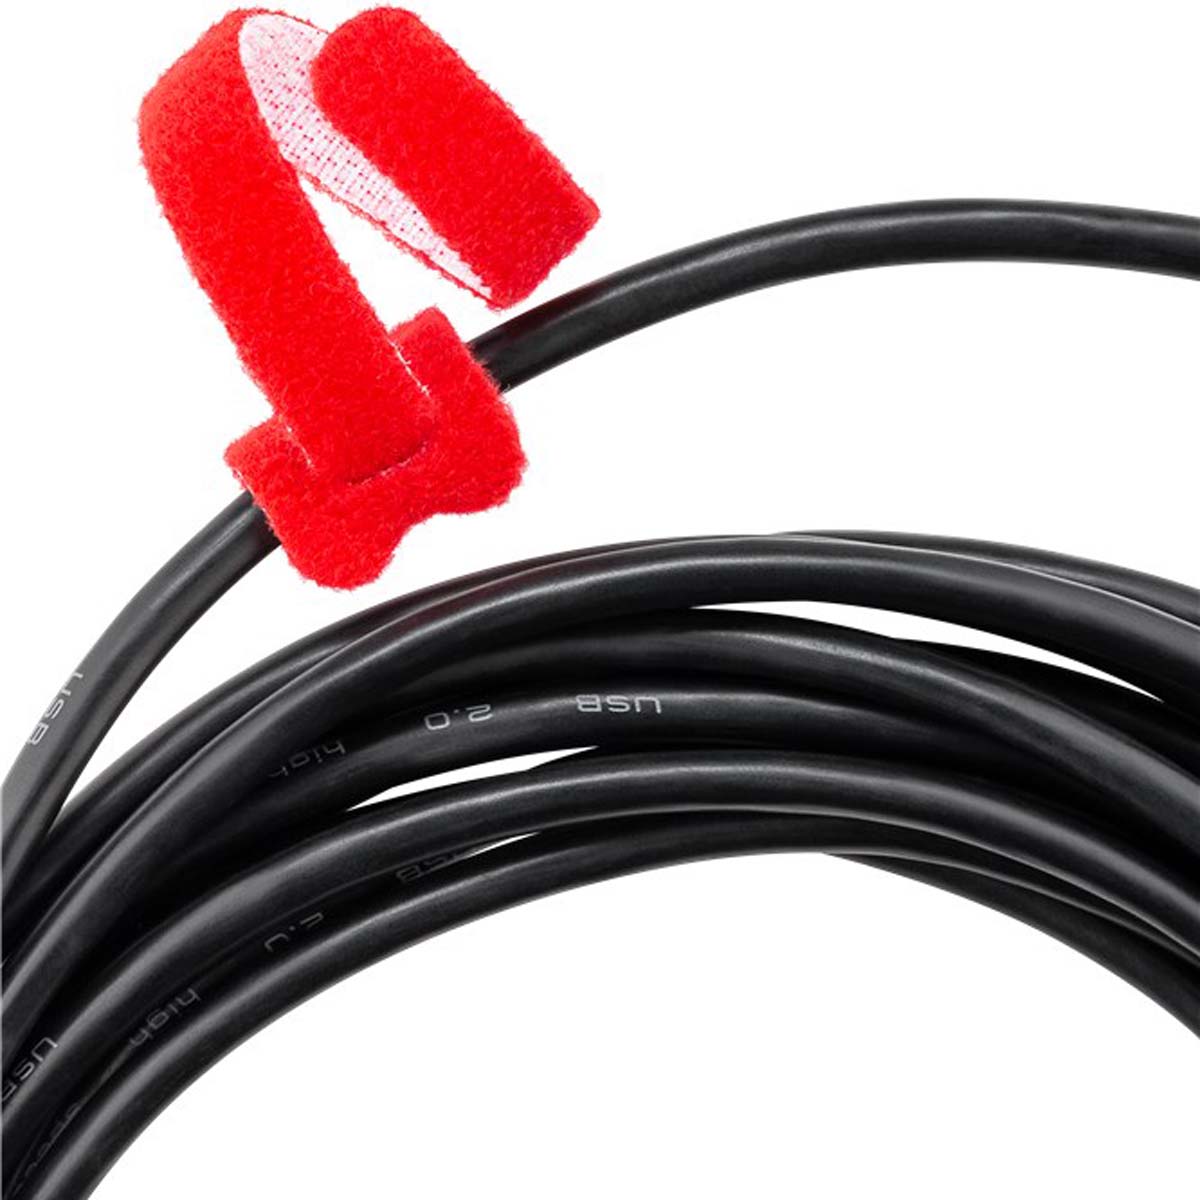 Goobay Cable Management Hook & Loop Set - Red, Yellow and Blue.